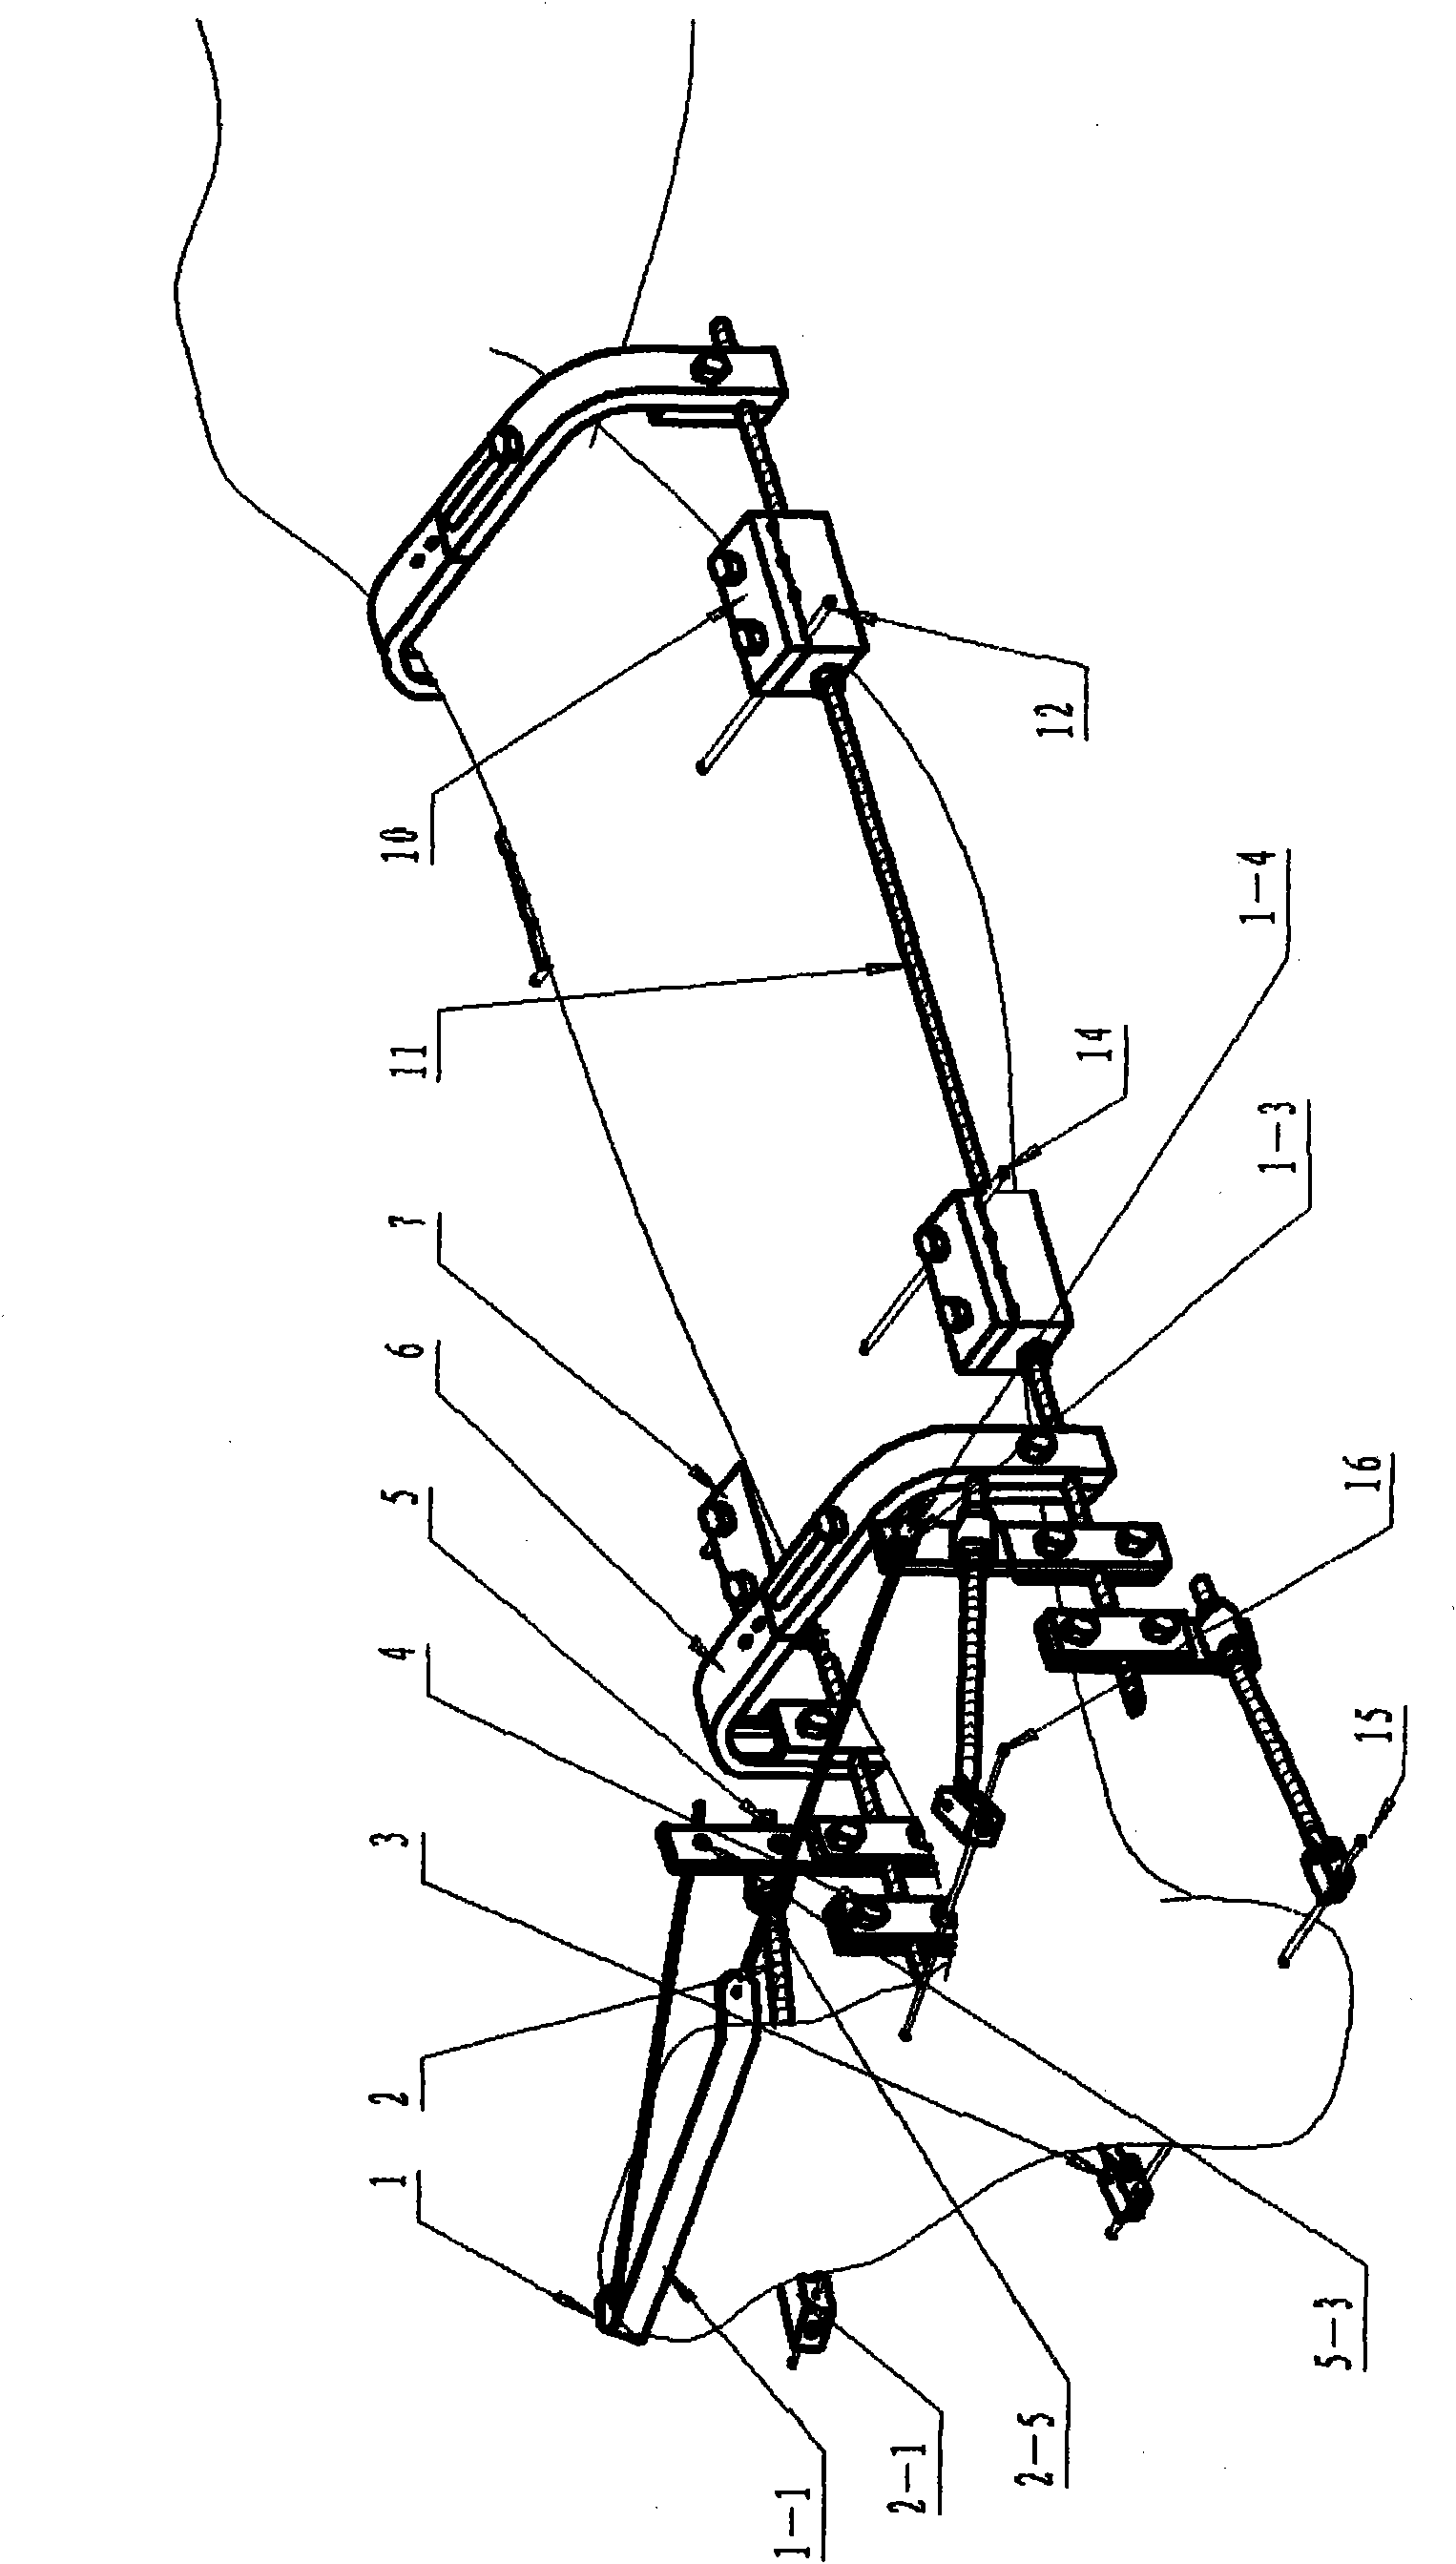 Minimally invasive skeletal external fixation device for correcting foot accelerator drop and talipes varus